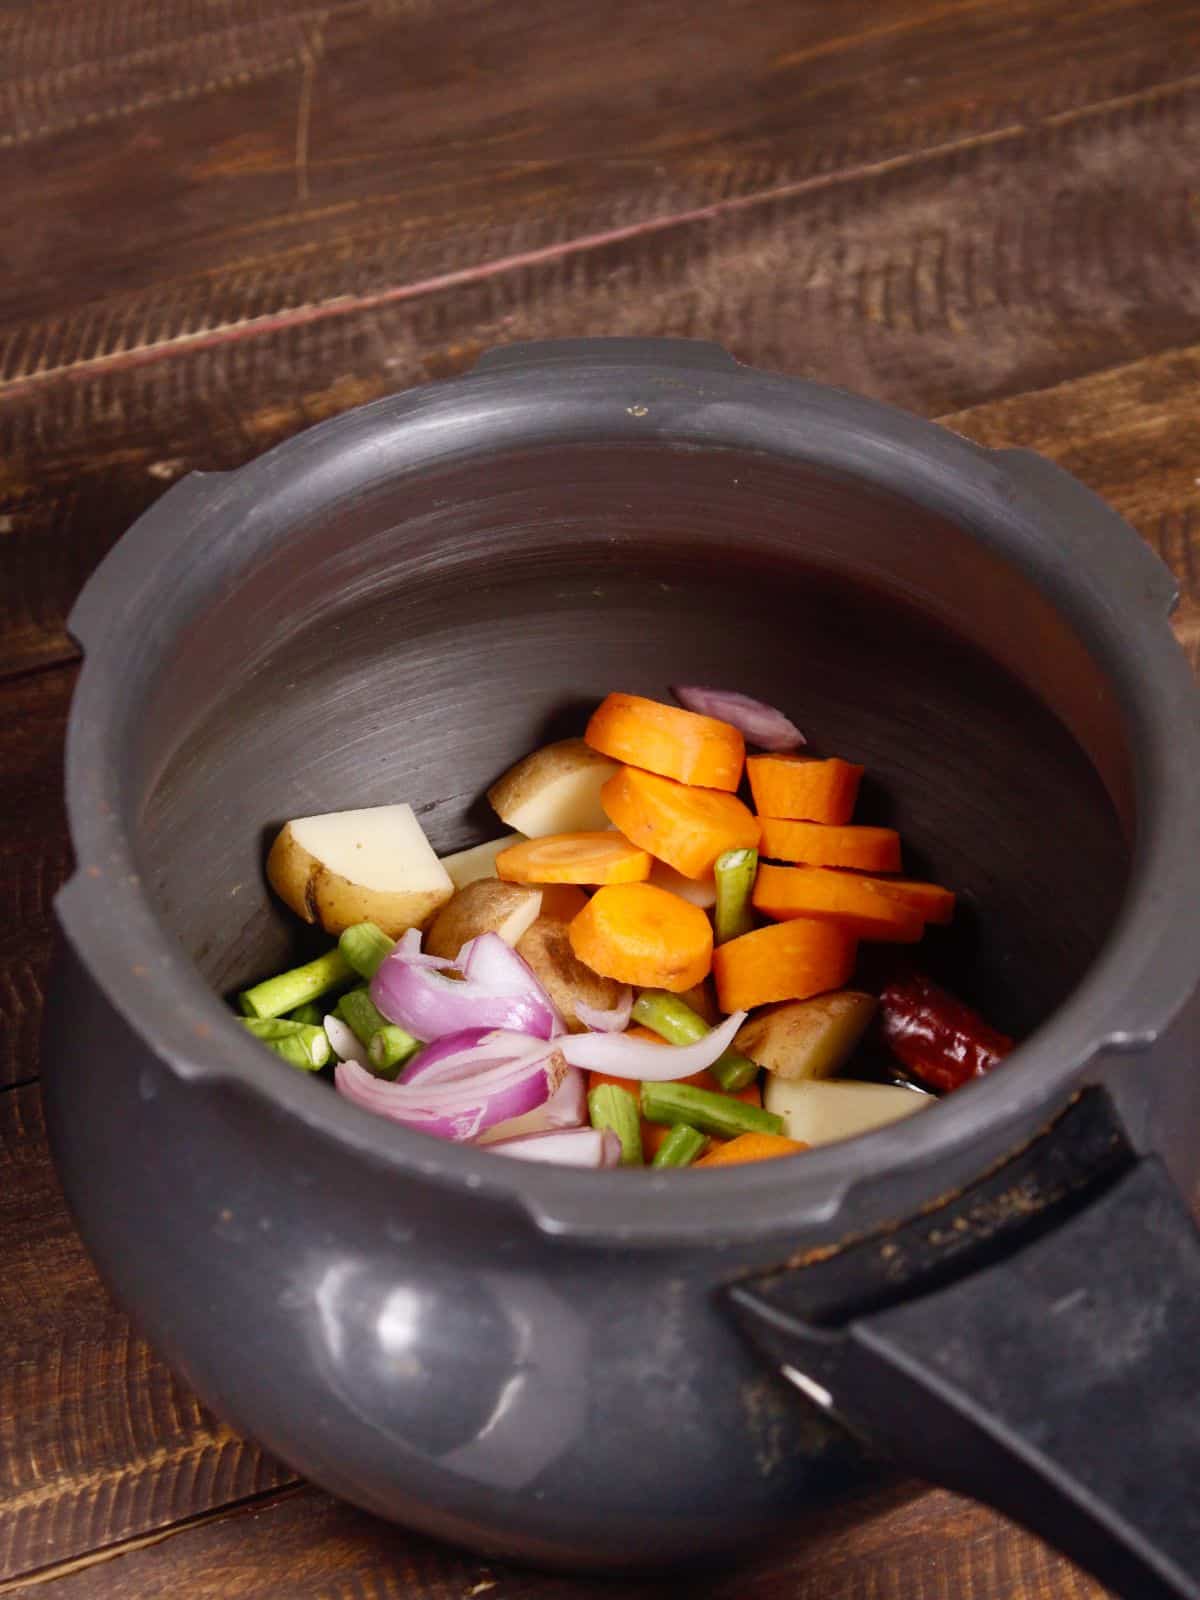 add chopped vegetables to the pot